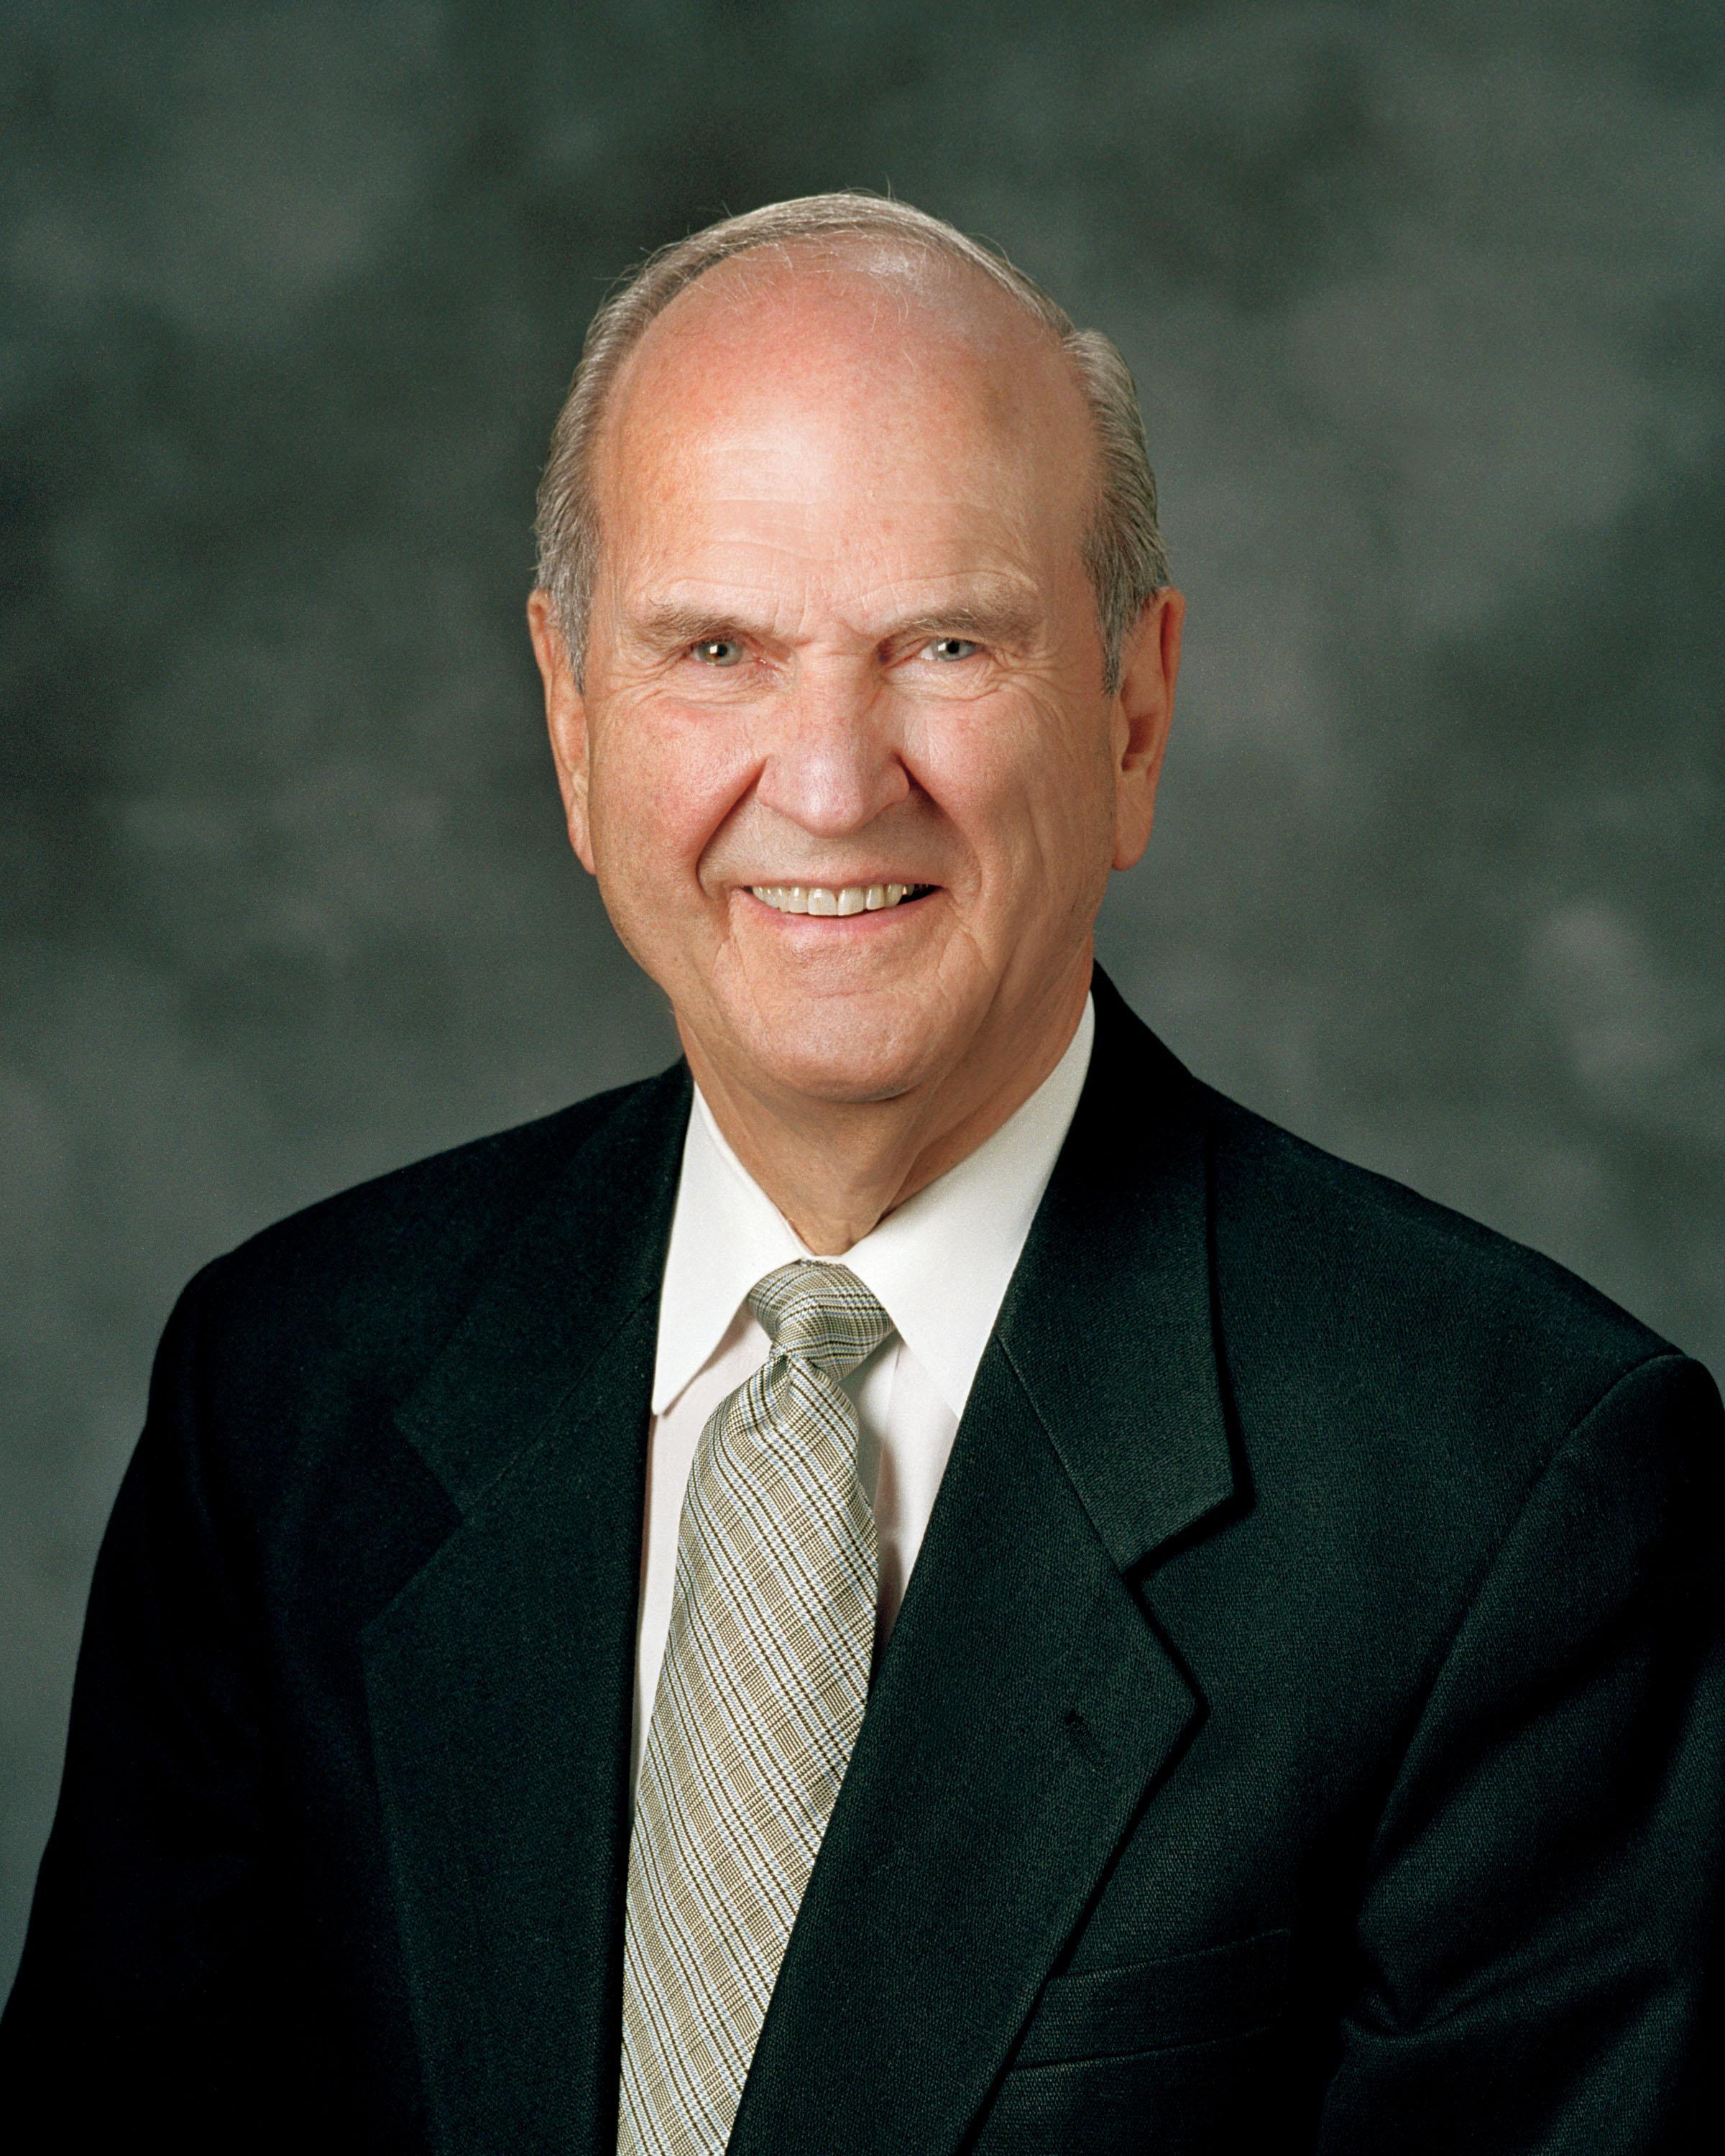 Russell M. Nelson Sustaining the prophets The Daily Universe